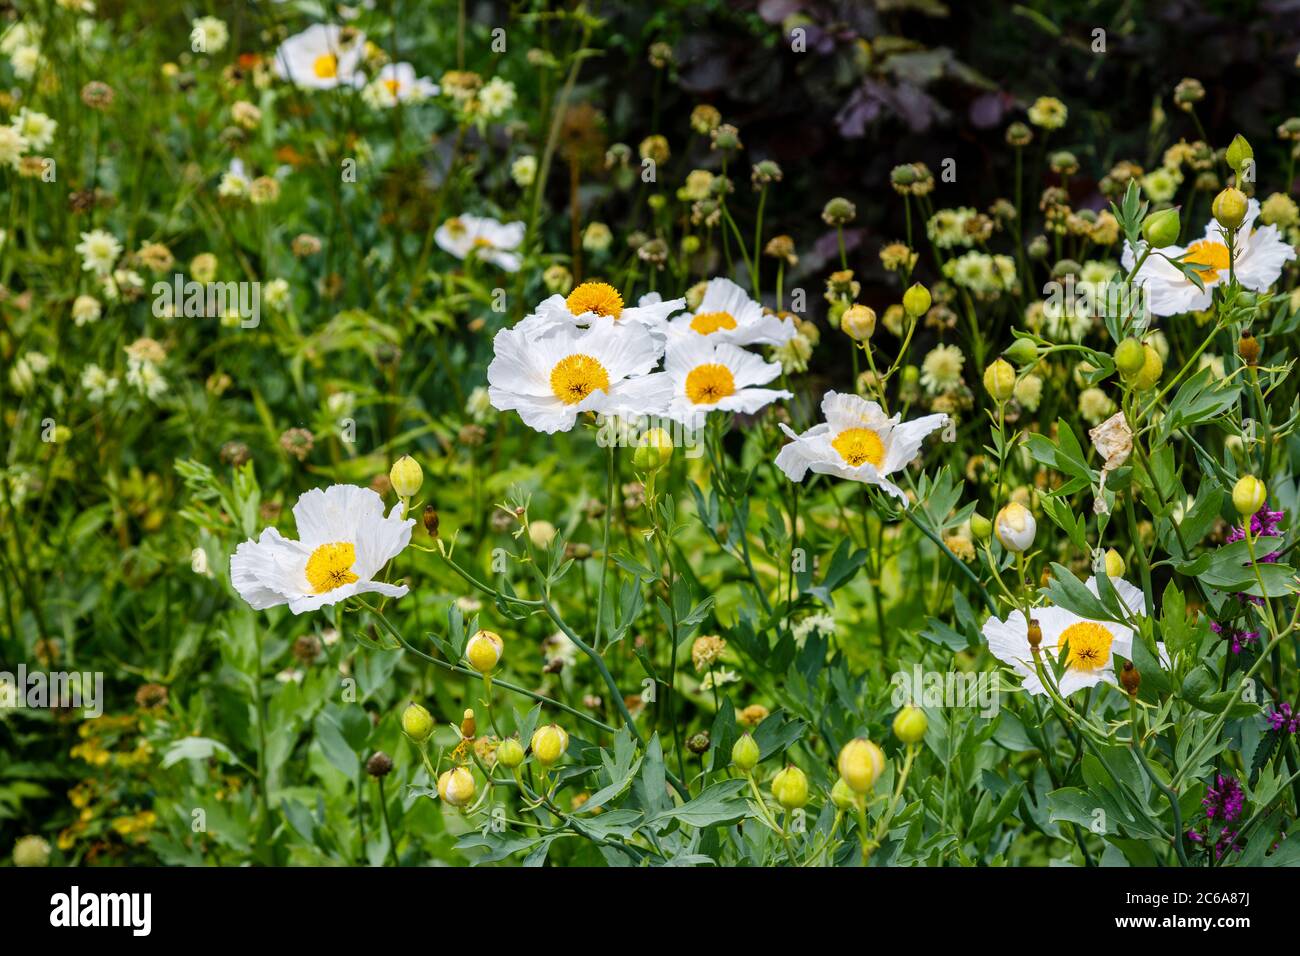 California Tree Poppy, Romneya Coulteri, white with yellow stamens, a summer flowering shrub in a border in a garden in West Sussex, southeast England Stock Photo